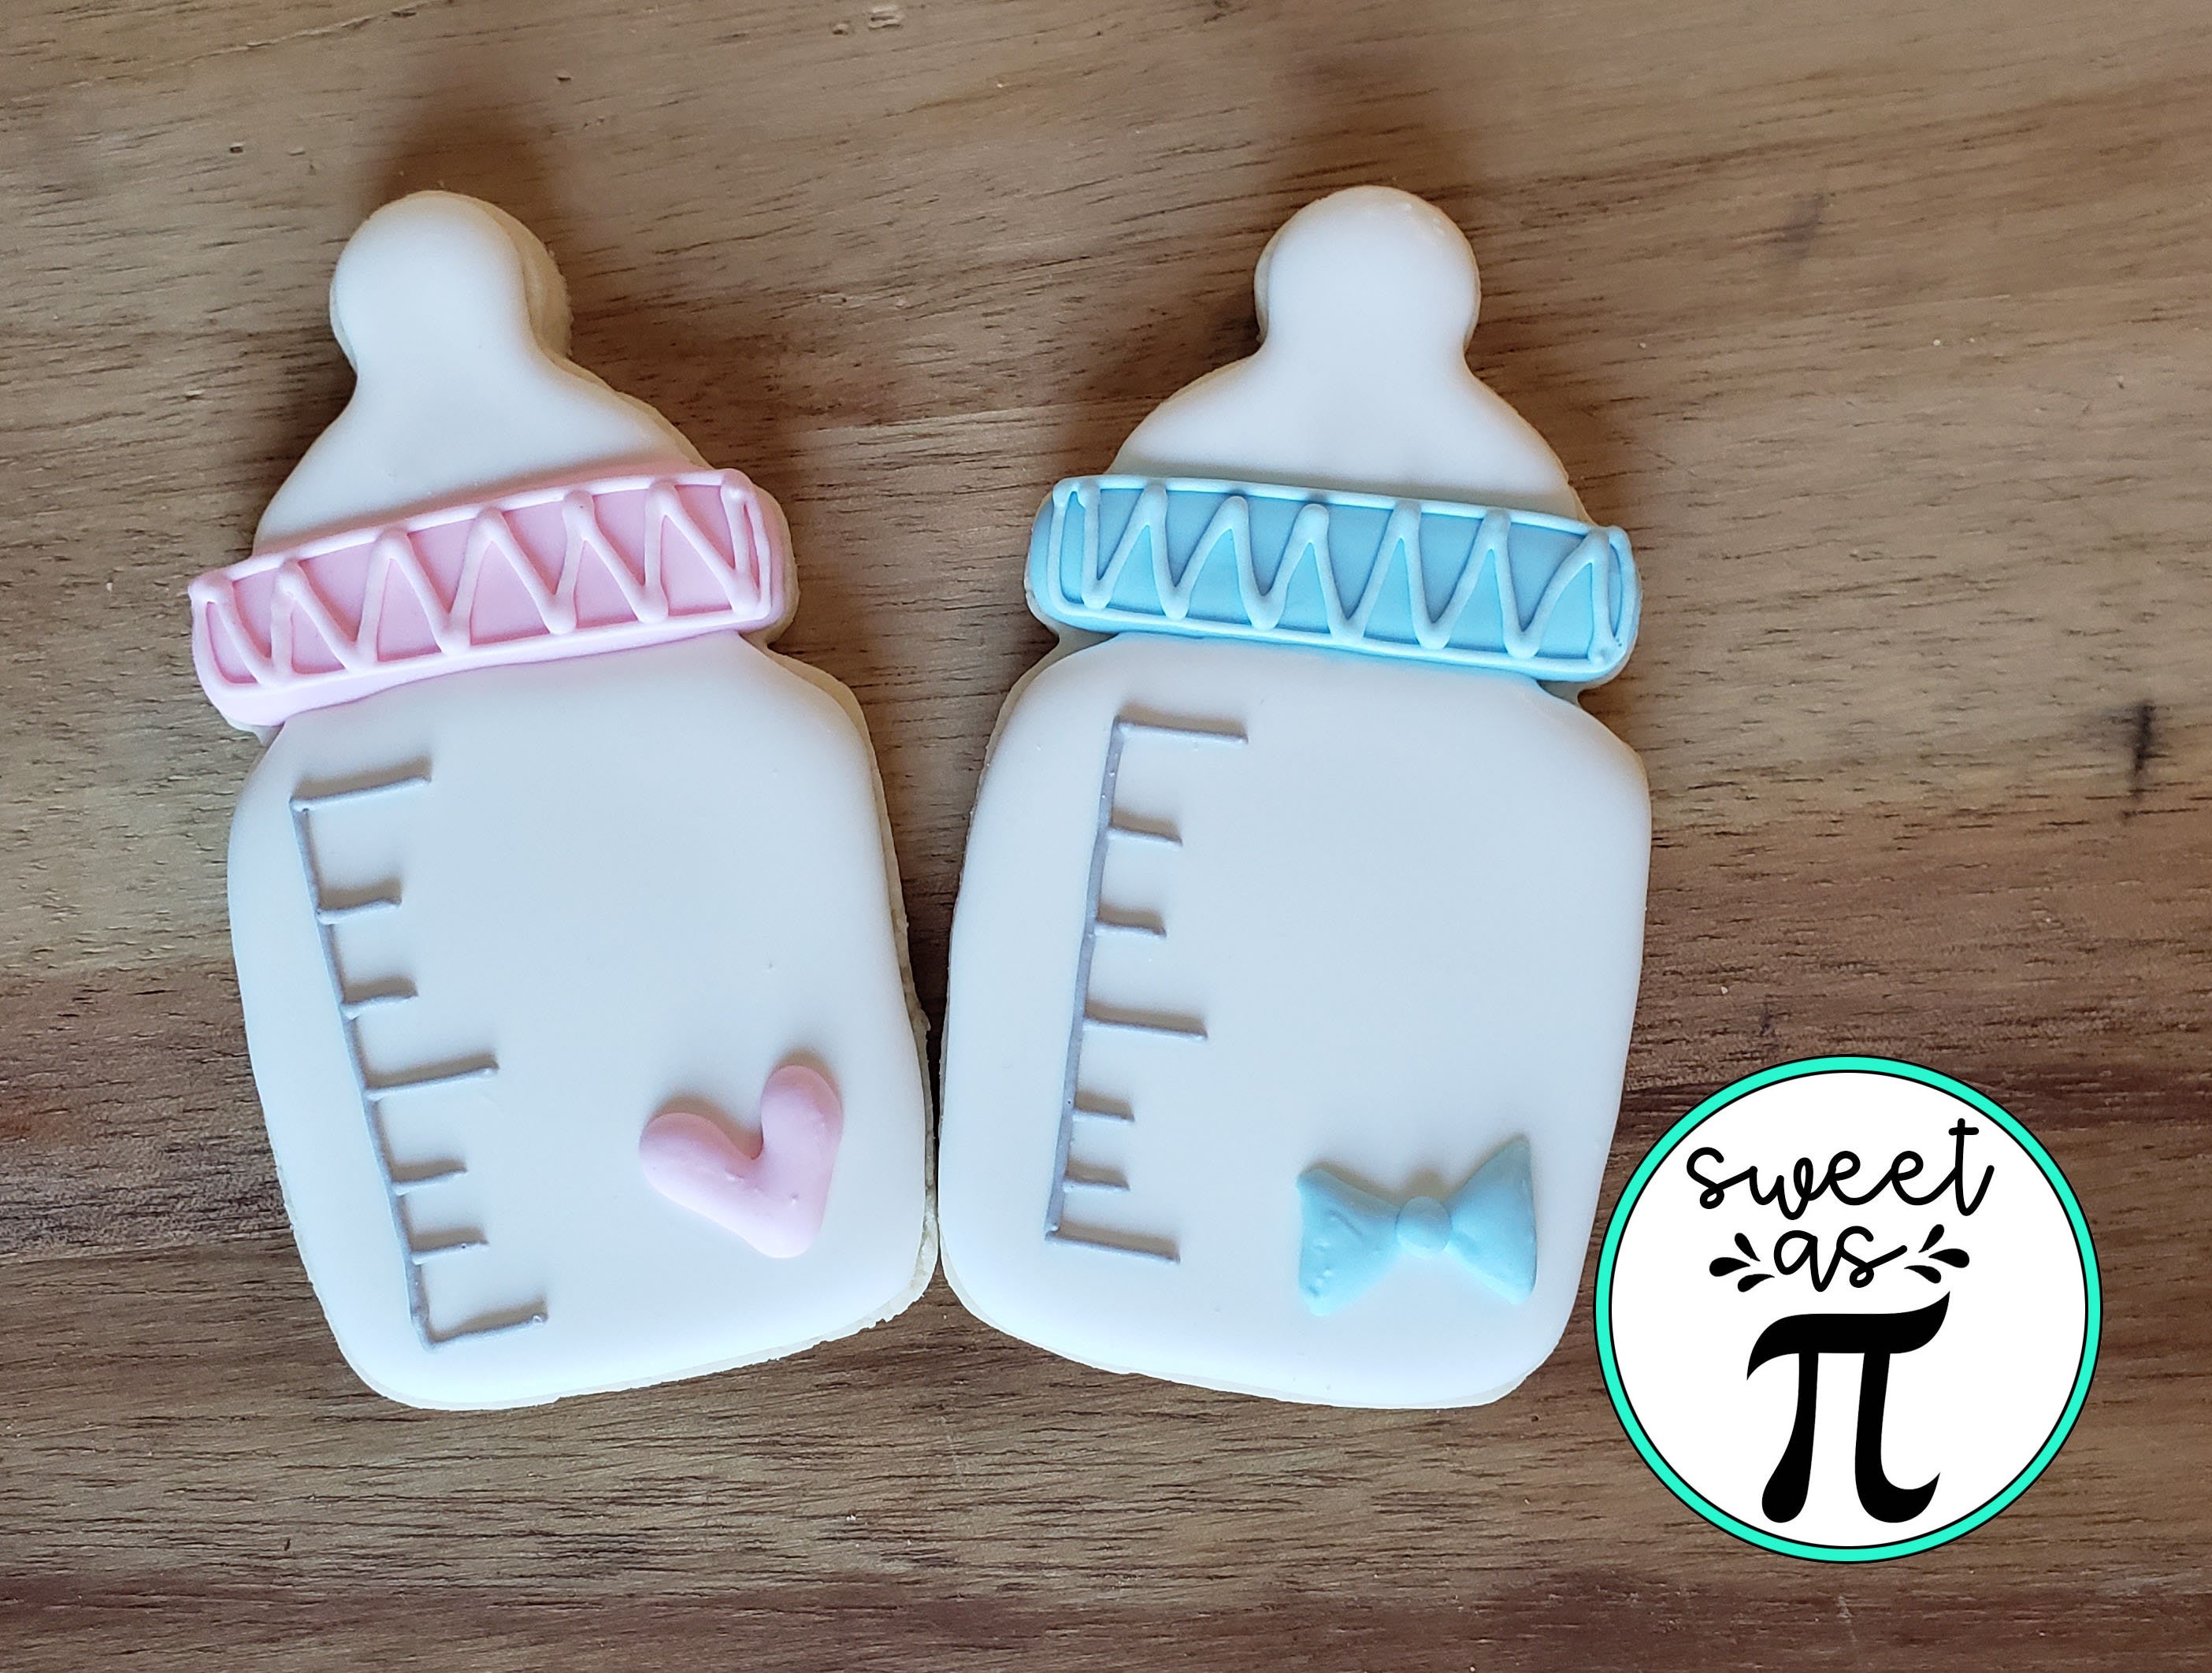 How To Make Decorated Graphic Design Style Baby Bottle Sugar Cookies